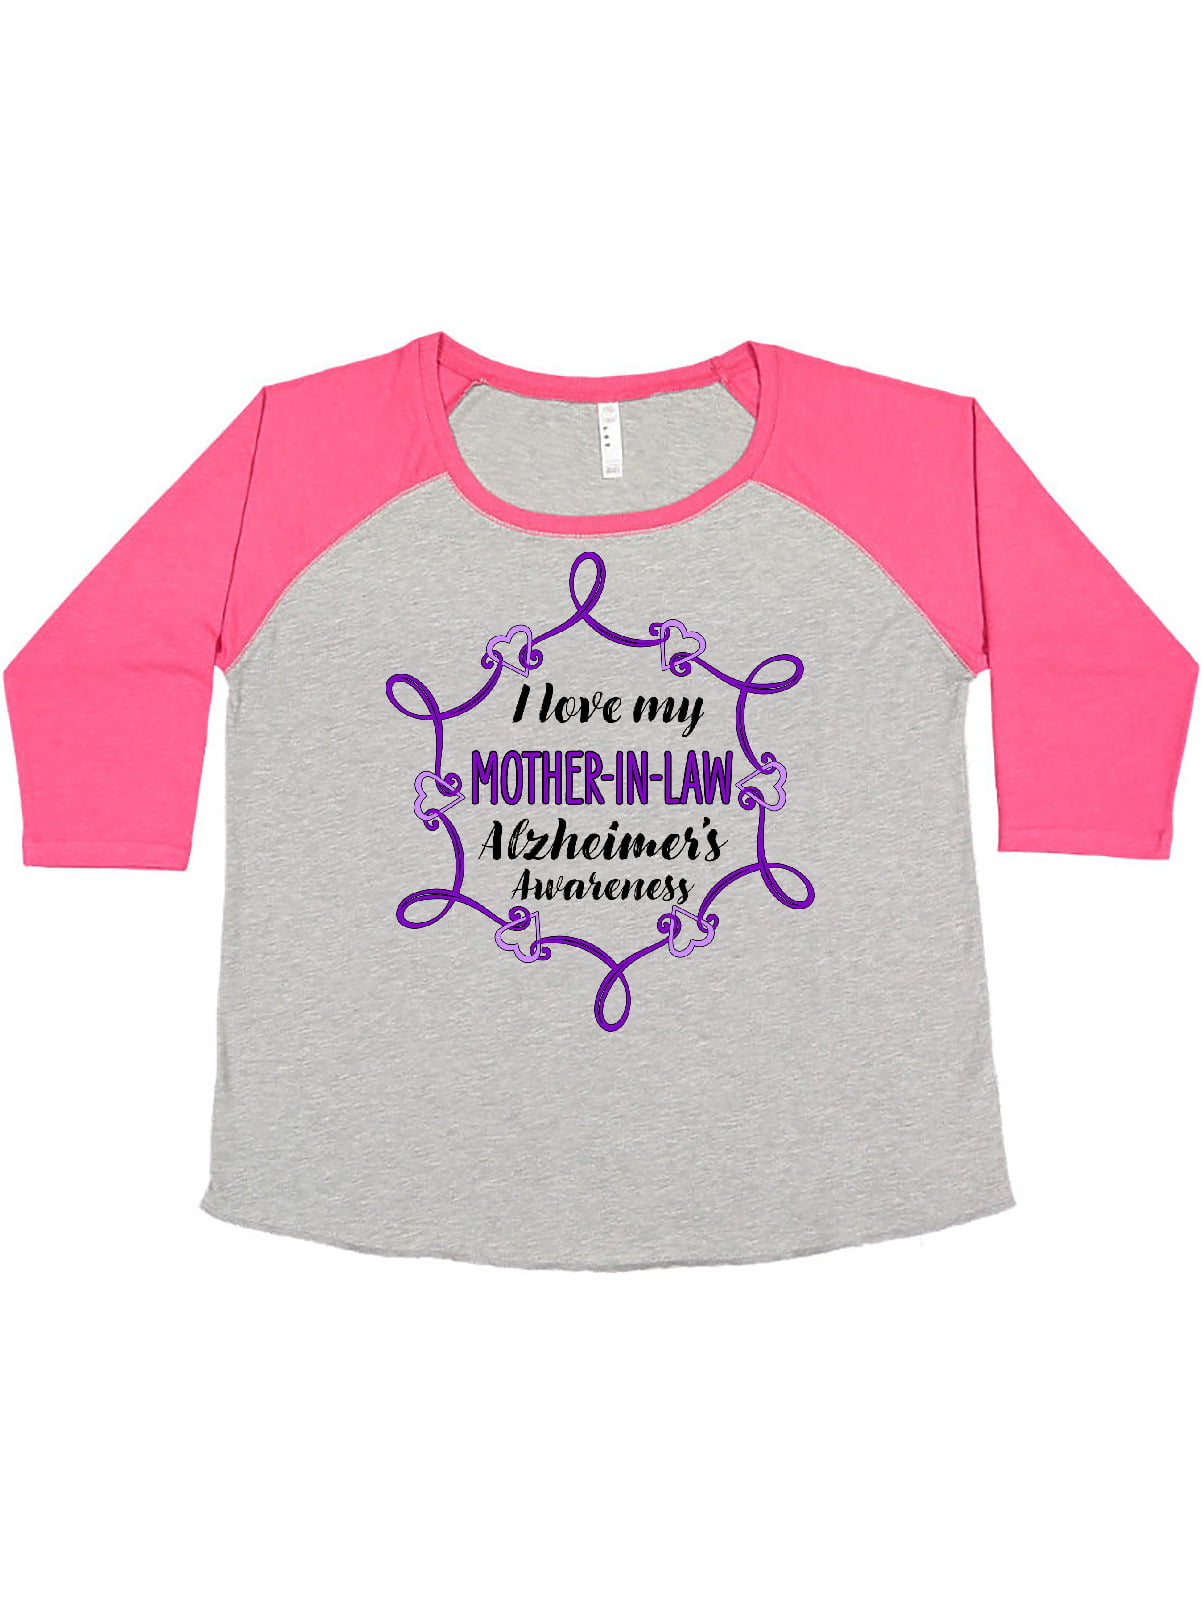 inktastic Gift for Mother-in-Laws 1 of a Kind Mother-in-Law Toddler T-Shirt